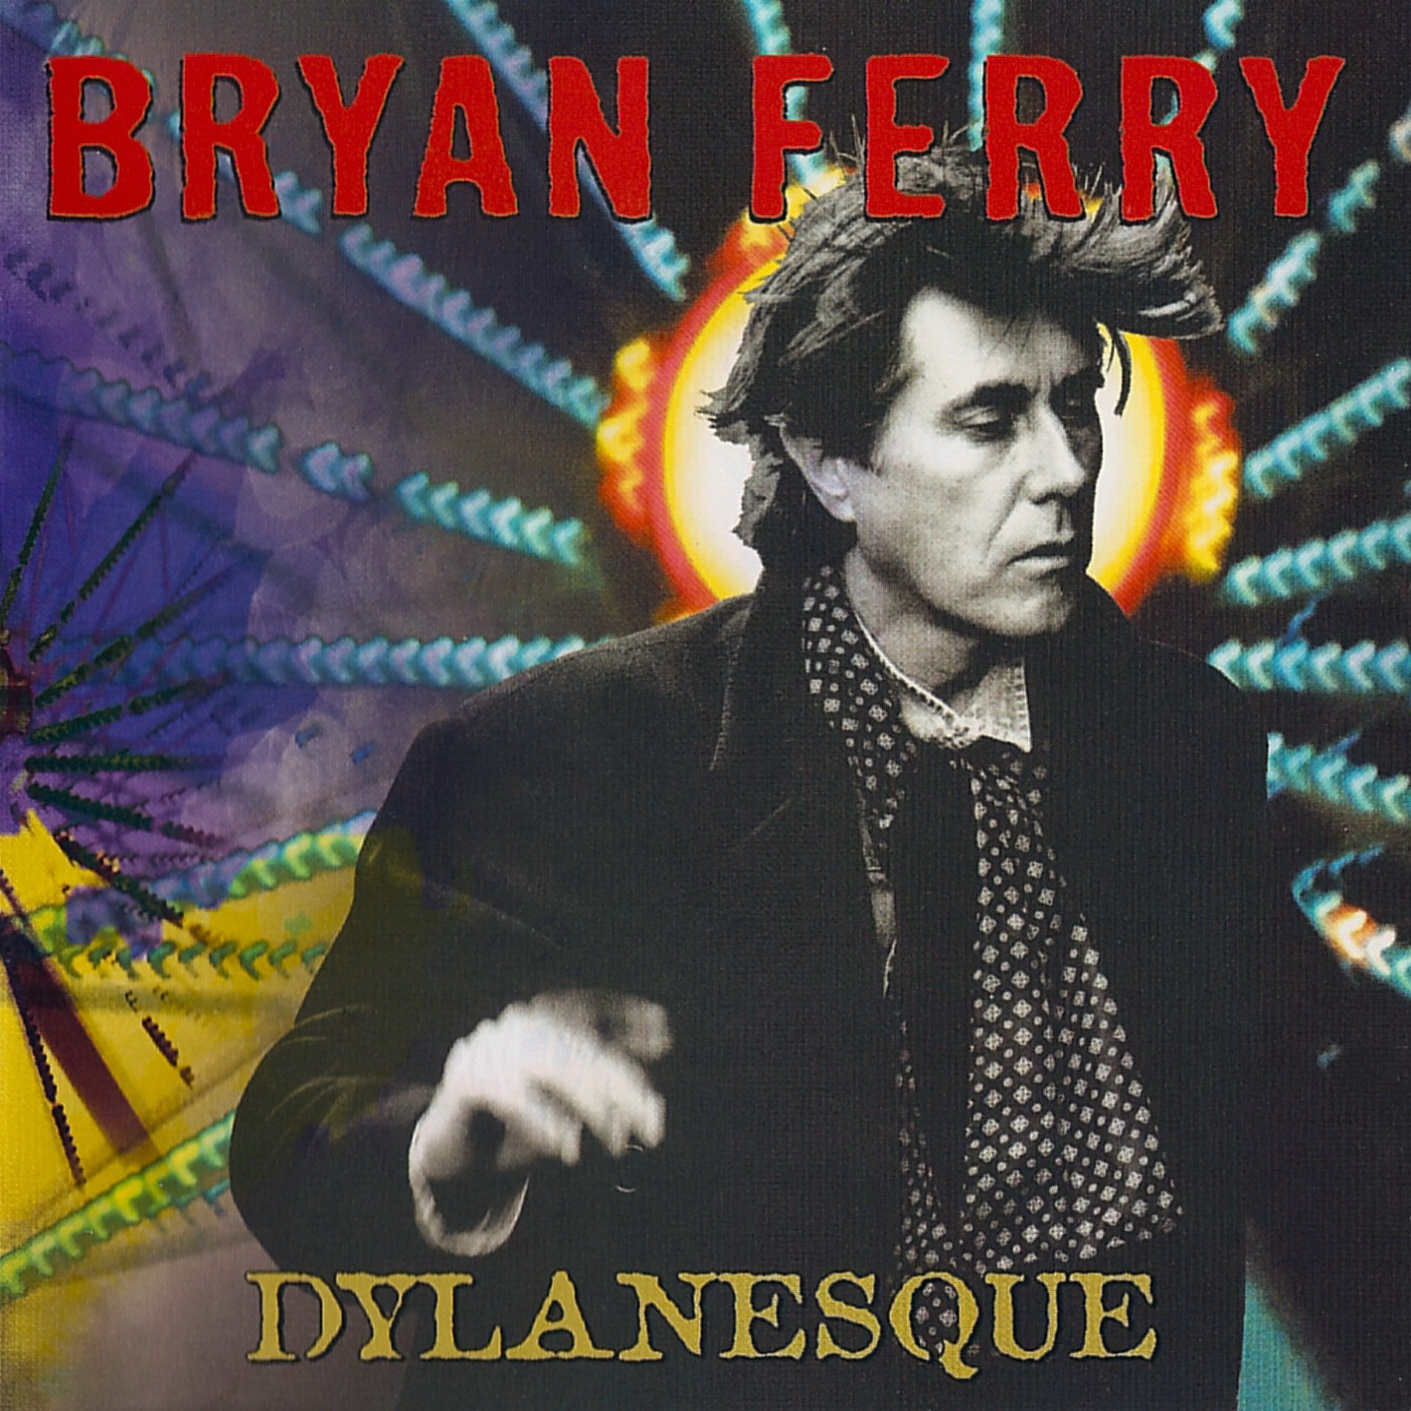 Bryan Ferry - Dylanesque (2007) FLAC Download